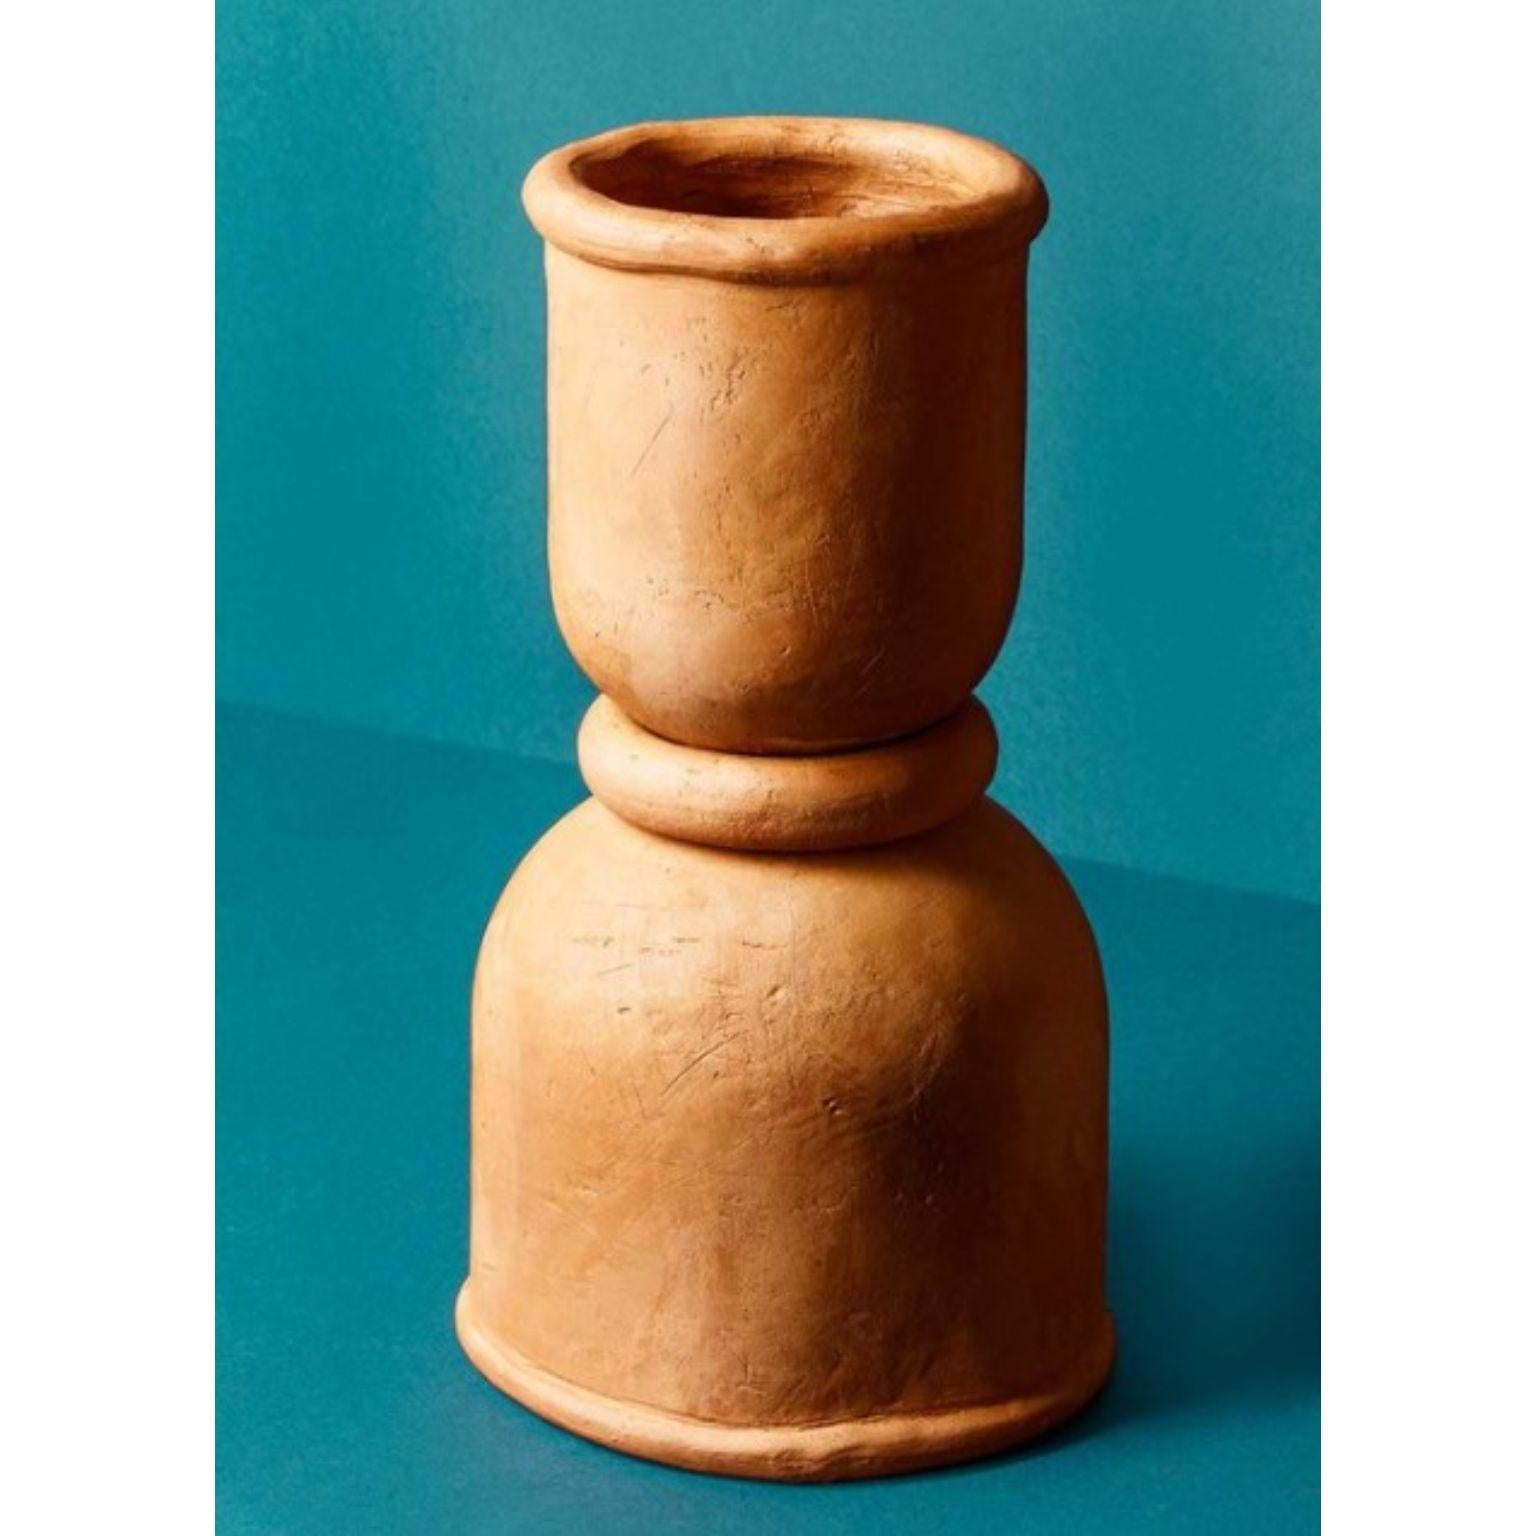 Mix & Match large vase by Tero Kuitunen
Material: Handbuild terracotta.
Dimensions: D22 x H40 cm
Also Available: Two different Size that can be compiled in many ways.

Handbuild terracotta planters. Open edition

Designer Tero Kuitunen, b.